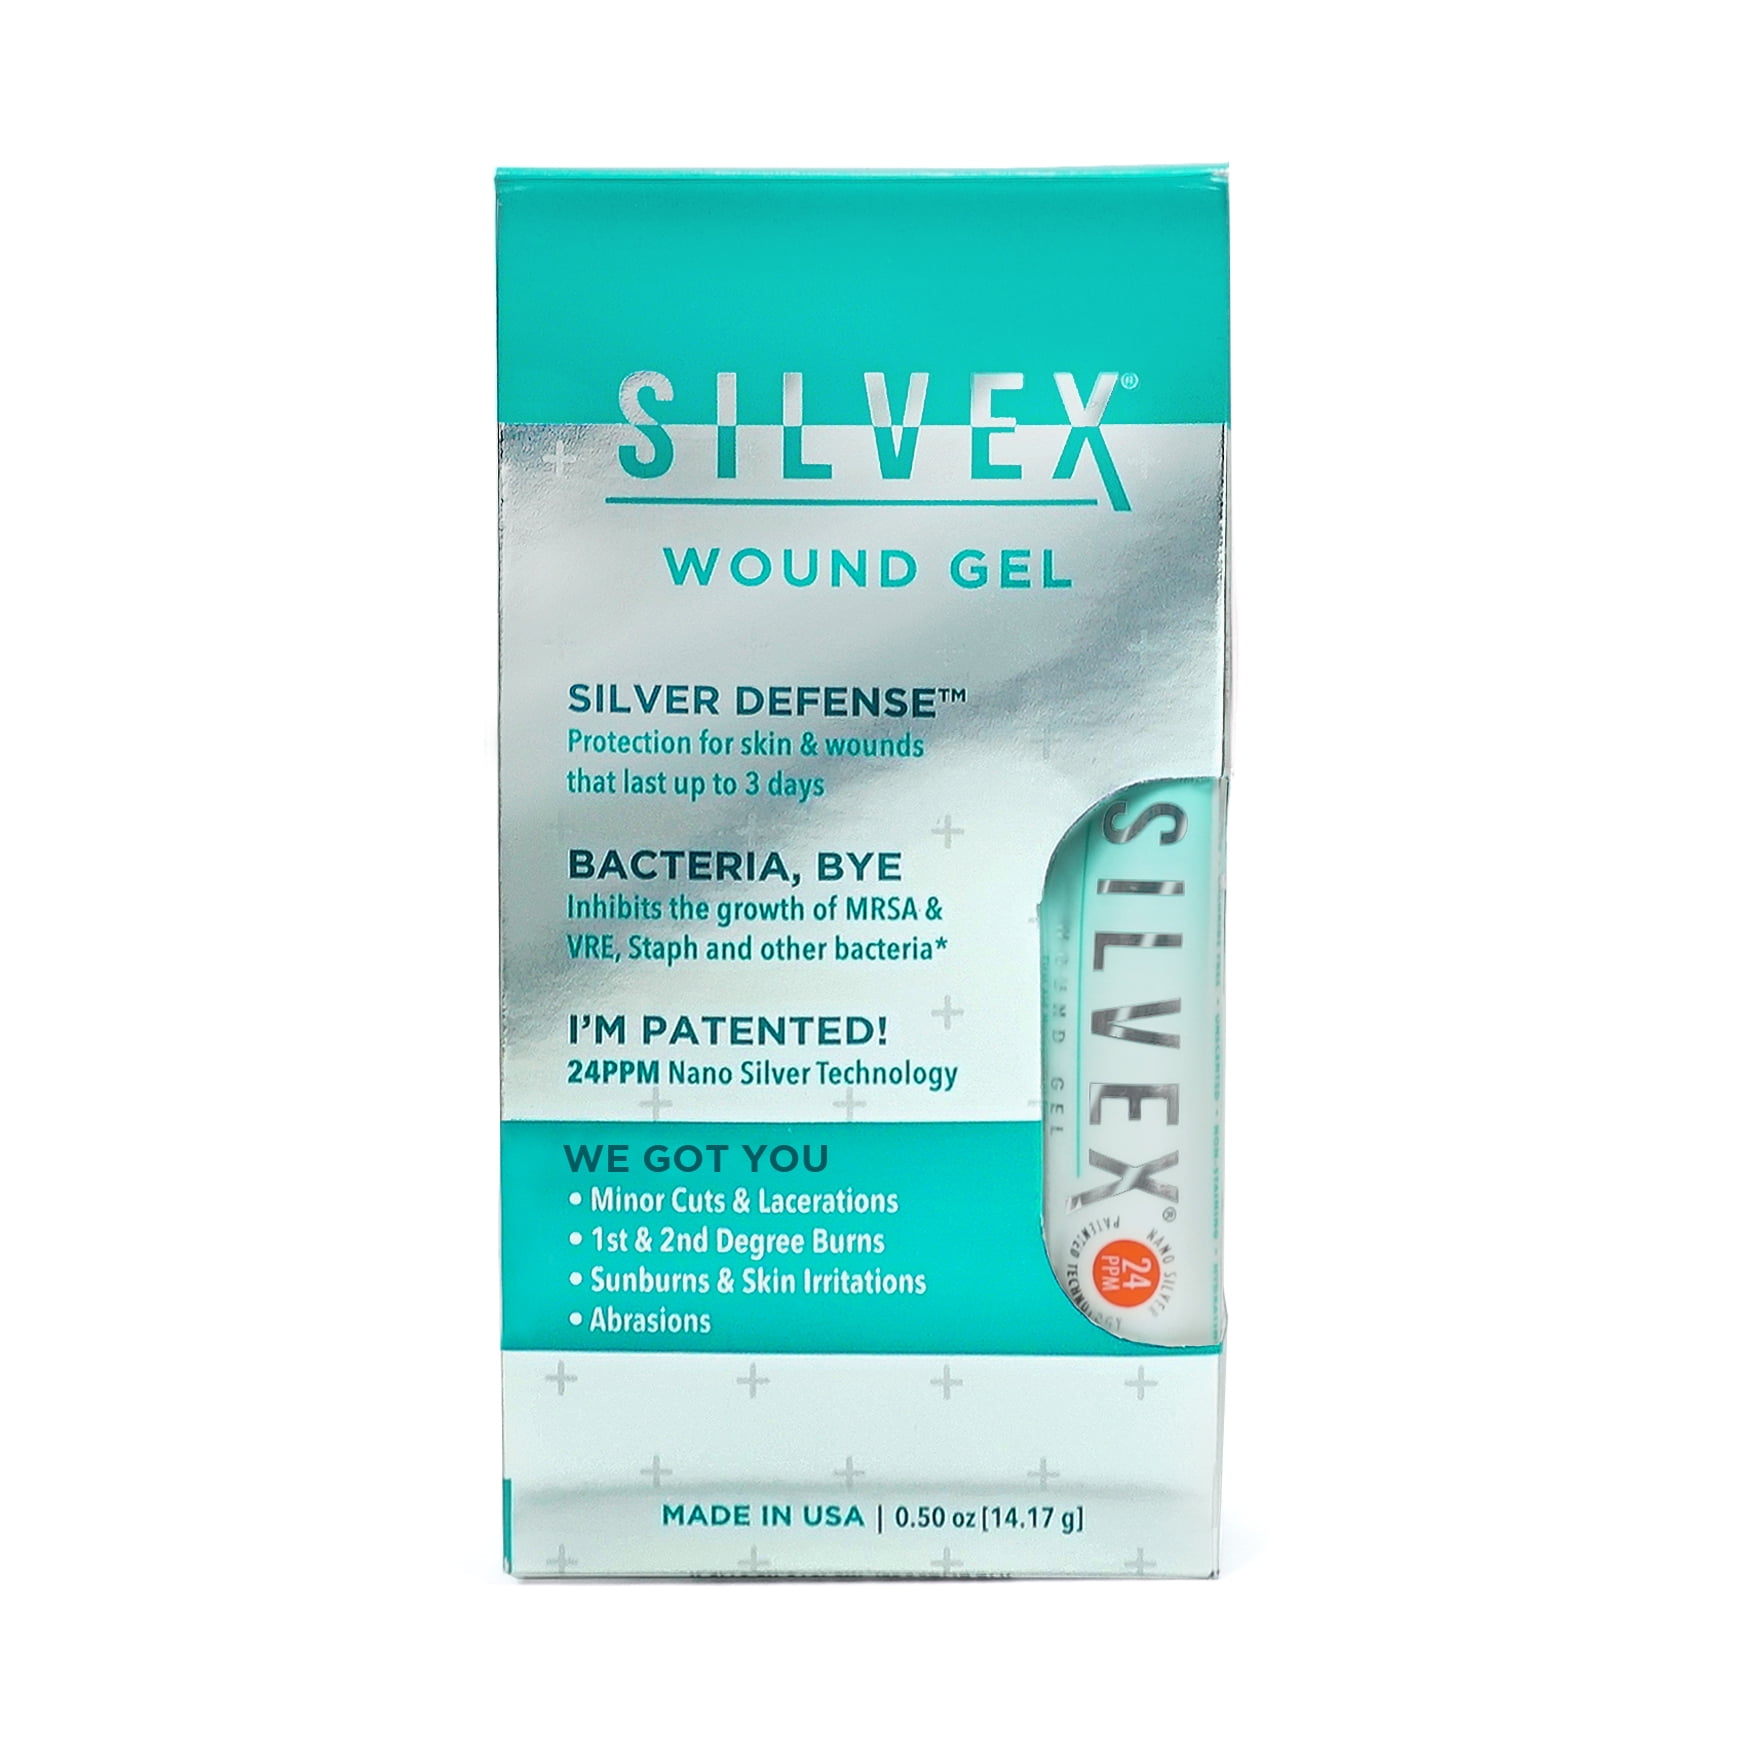 Silvex Wound Gel 0.5oz by Be Smart Get Prepared.  Antimicrobial, good for burns, sunburns, skin irritations, and abrasions